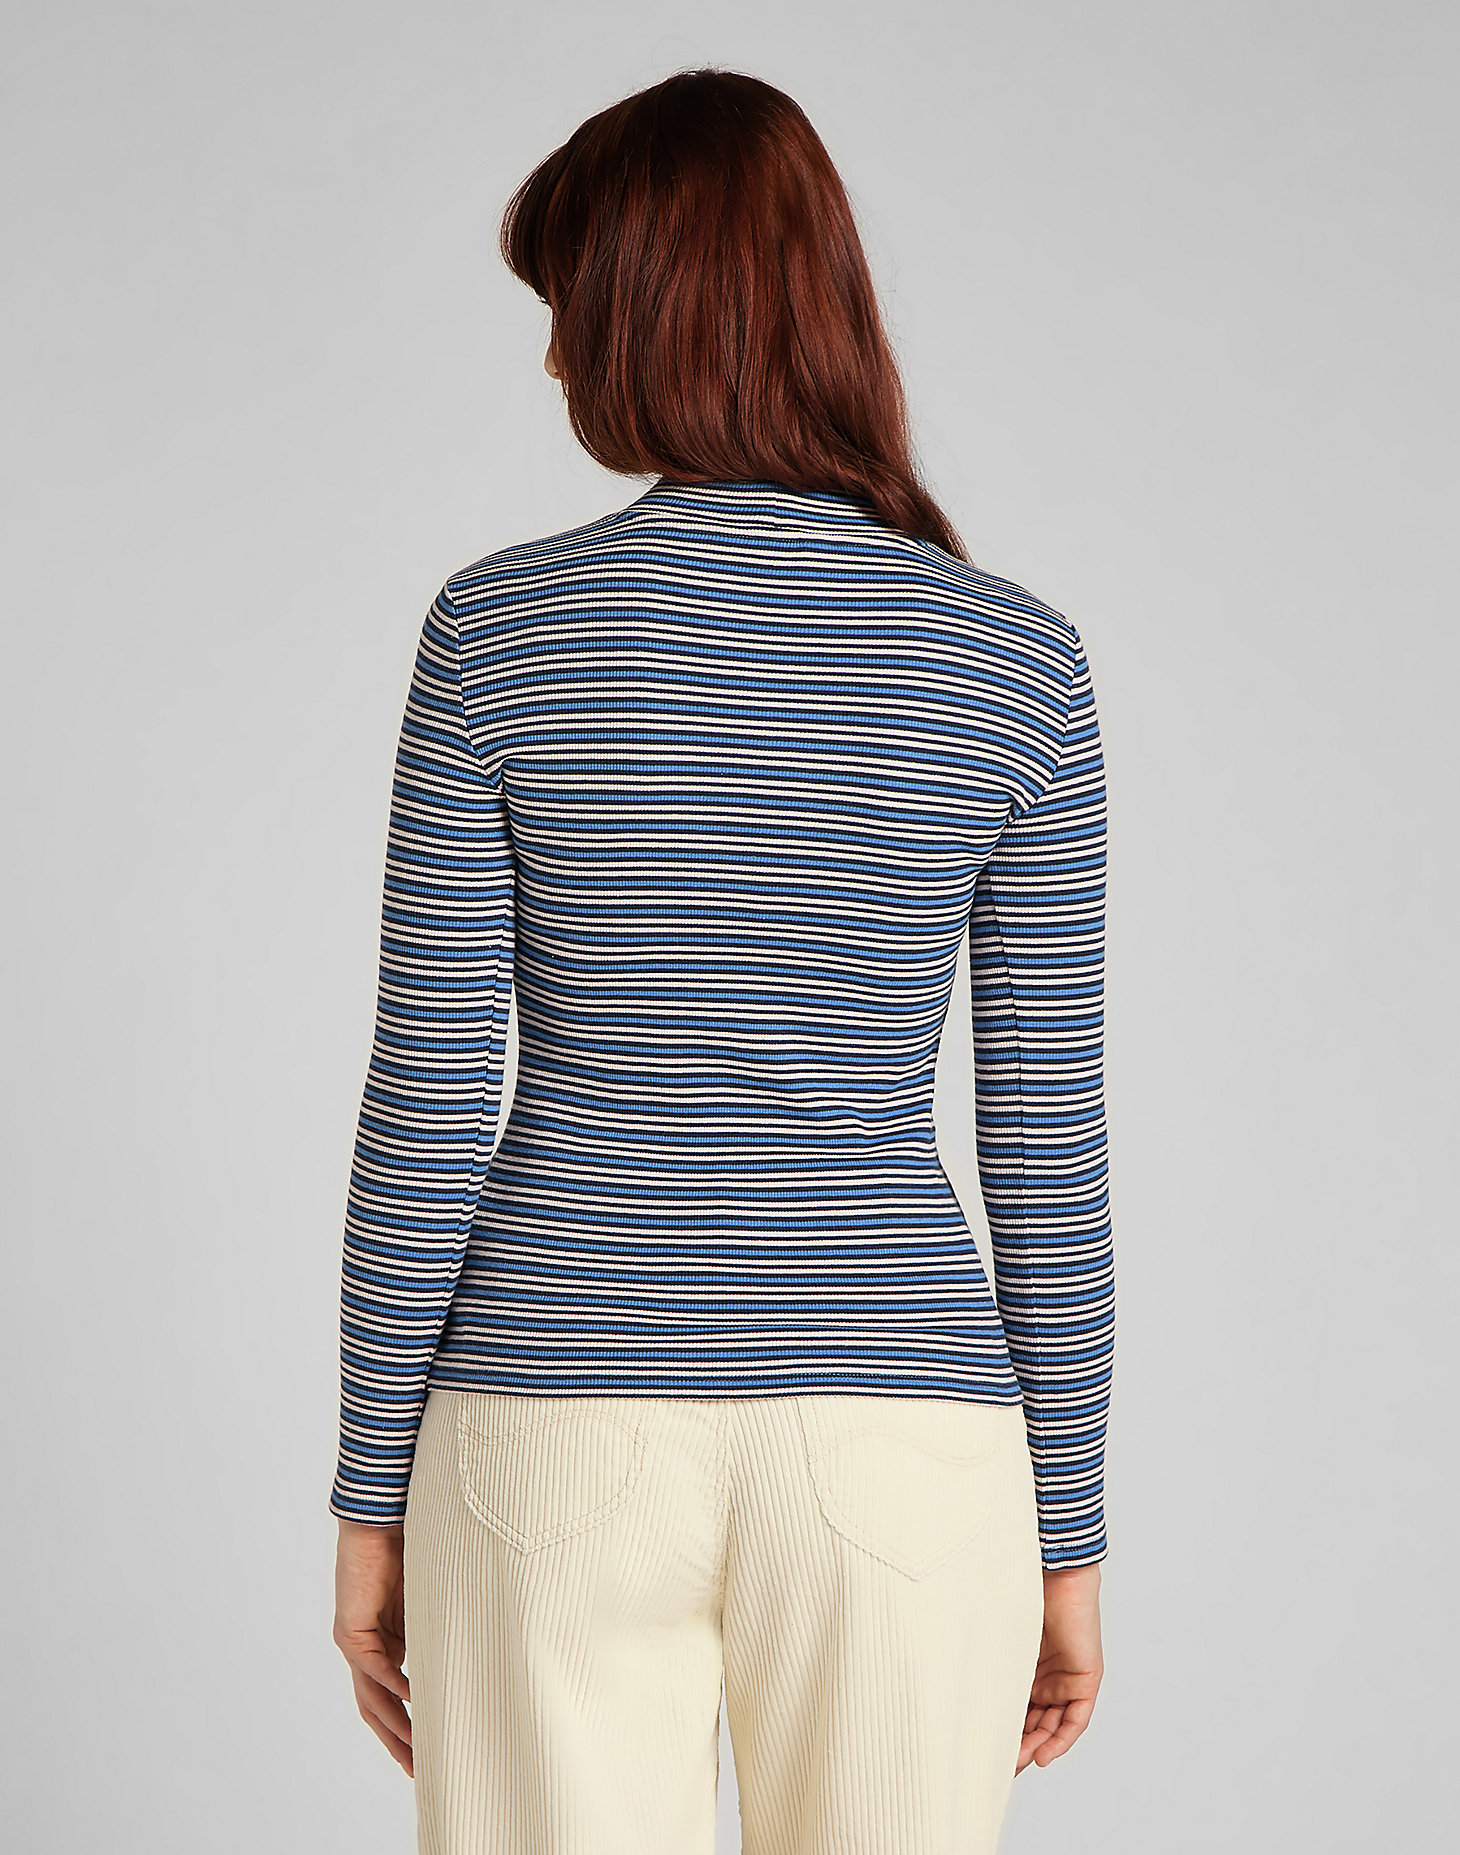 Ribbed Long Sleeve Striped Tee in Blue Yonder alternative view 1